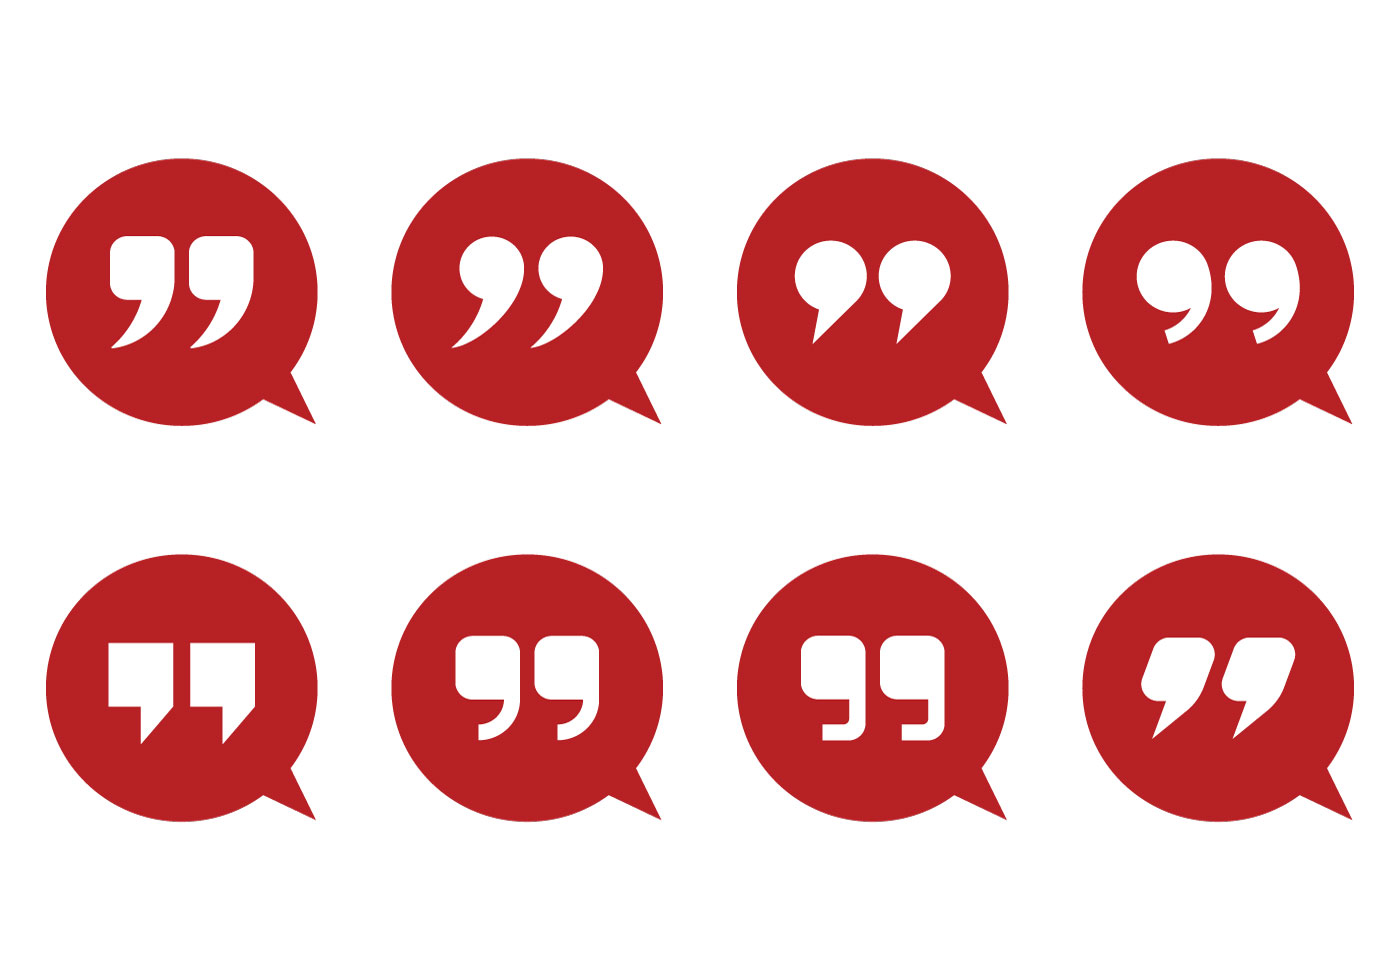 Quotation Mark Free Vector Art - (2444 Free Downloads)